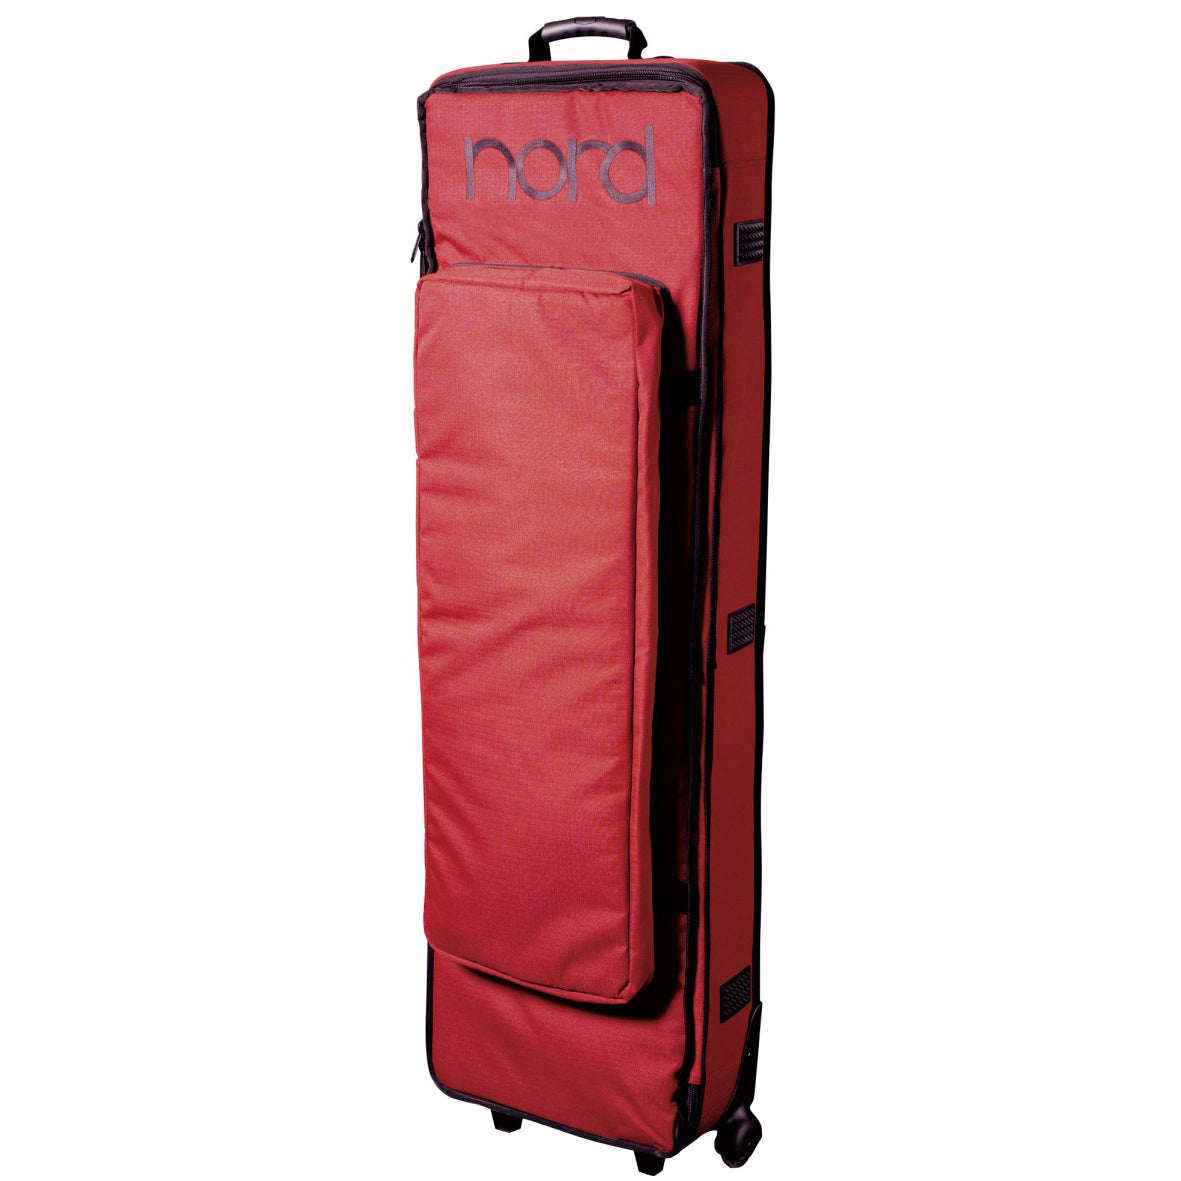 Nord GBP73 Soft Bag with Wheels